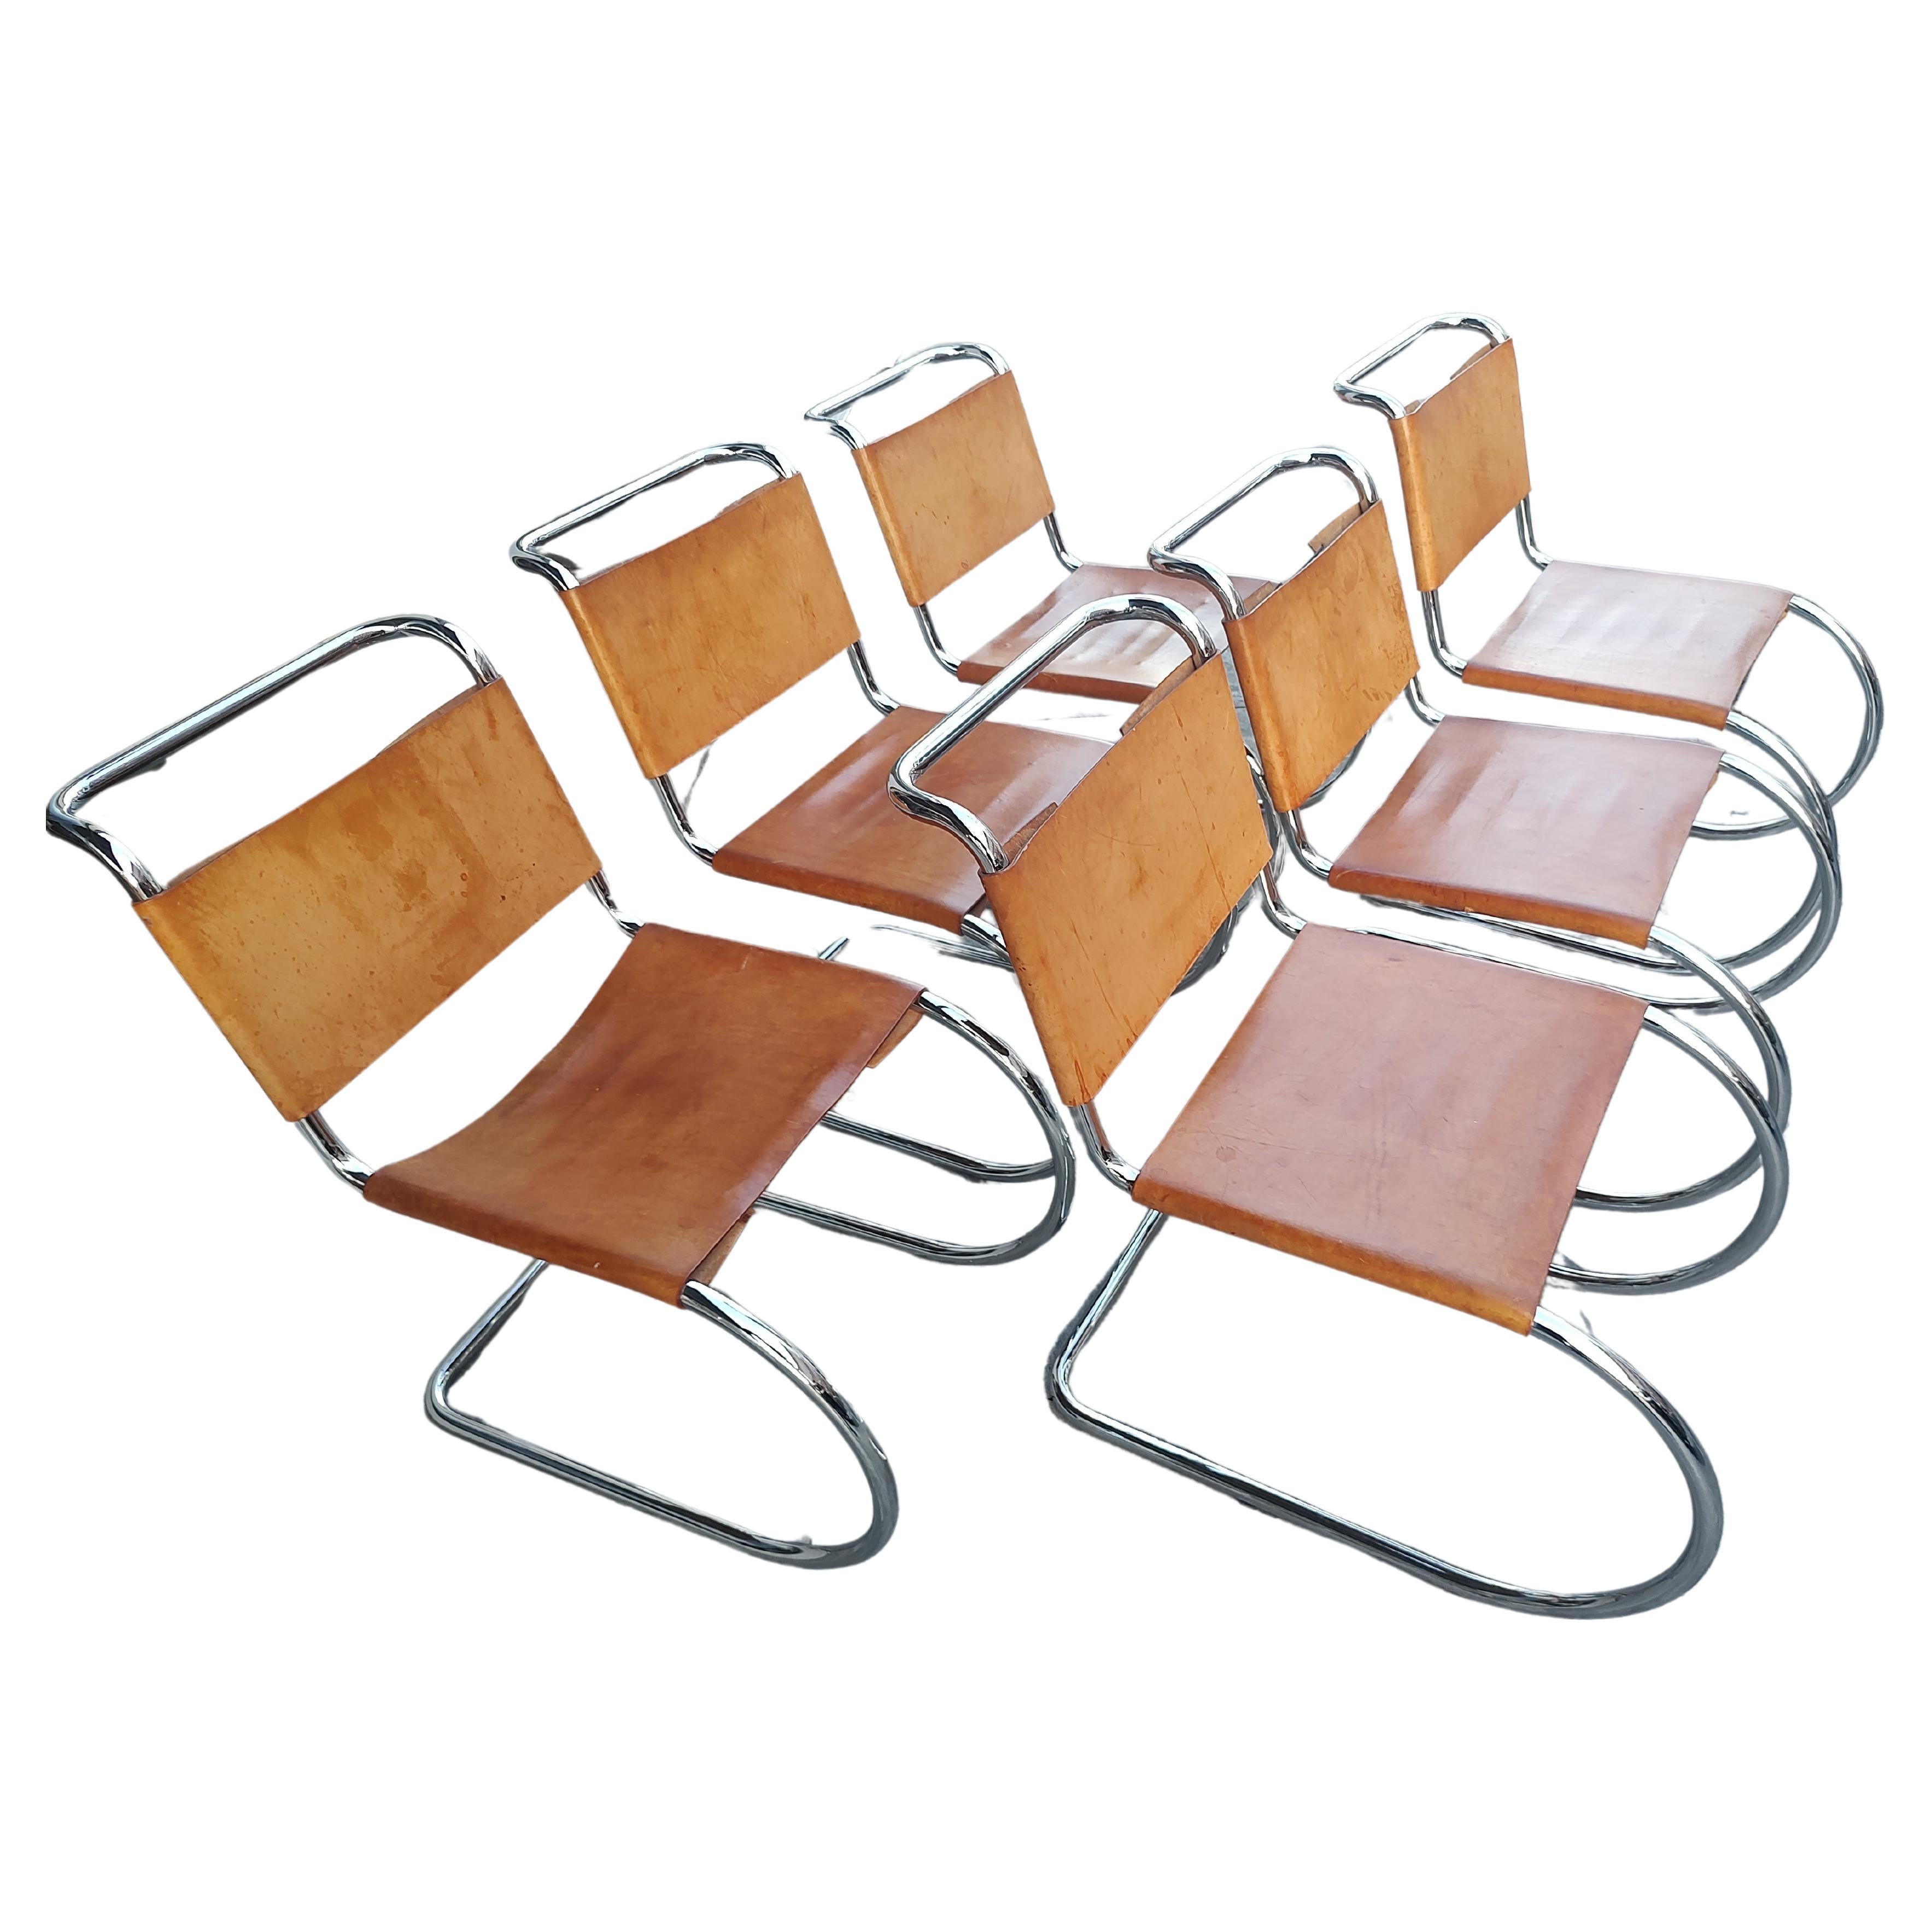 Fabulous set of 6 MR10 chairs designed by Mies van der Rohe almost a century ago and a most iconic chair. Set of 6 with thick saddle leather for seats and backs with cantilevered chrome frame chairs. Made by Palazzetti in Italy these are high